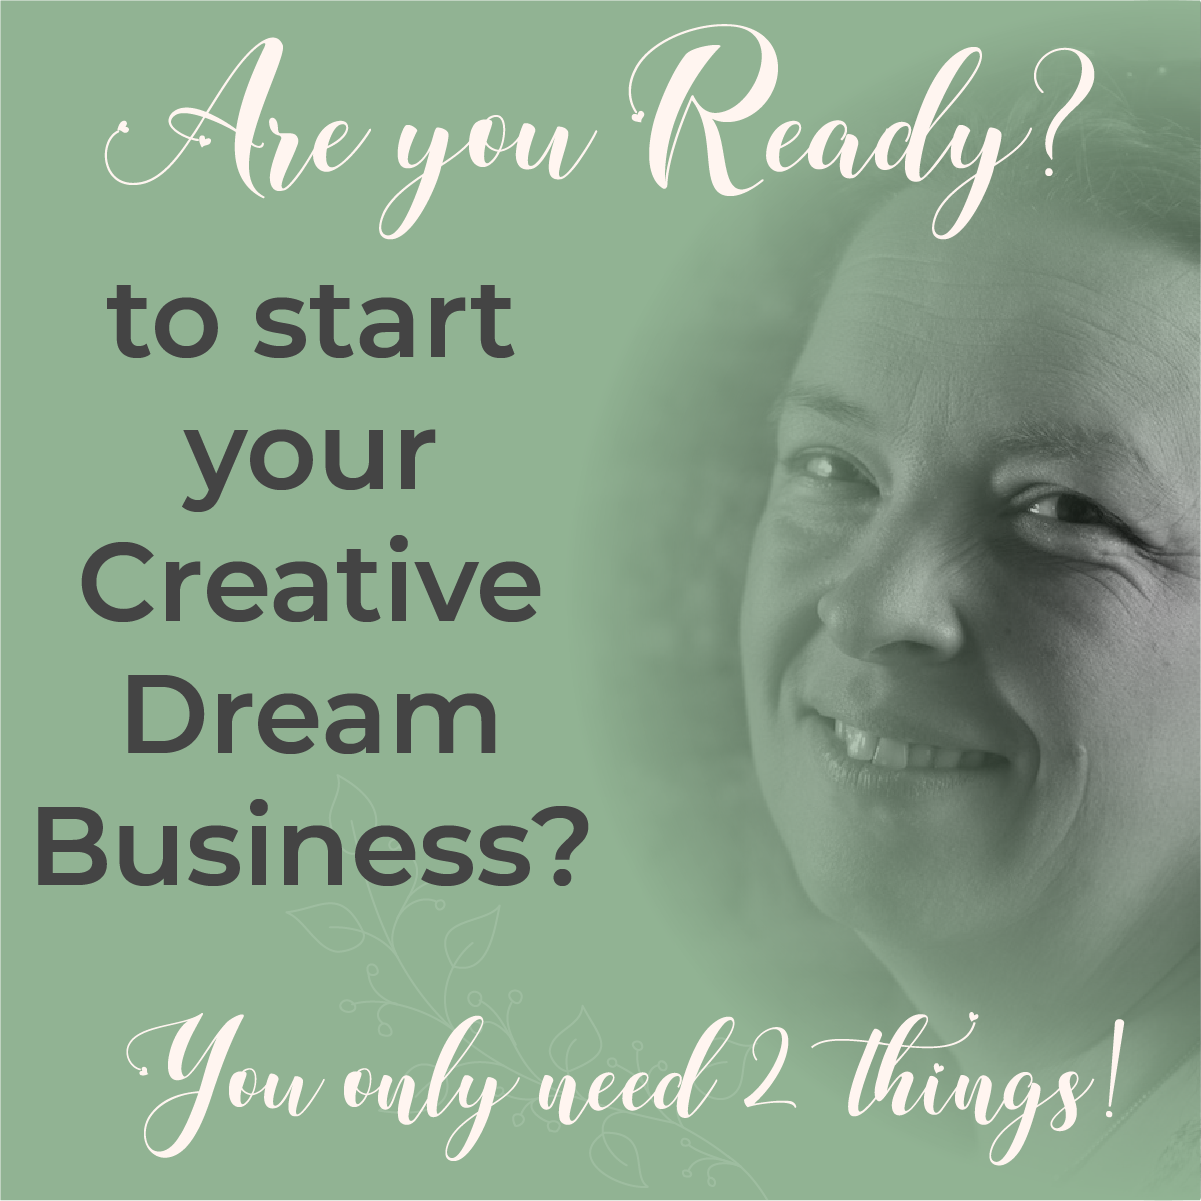 When am I ready to start my Creative Business?